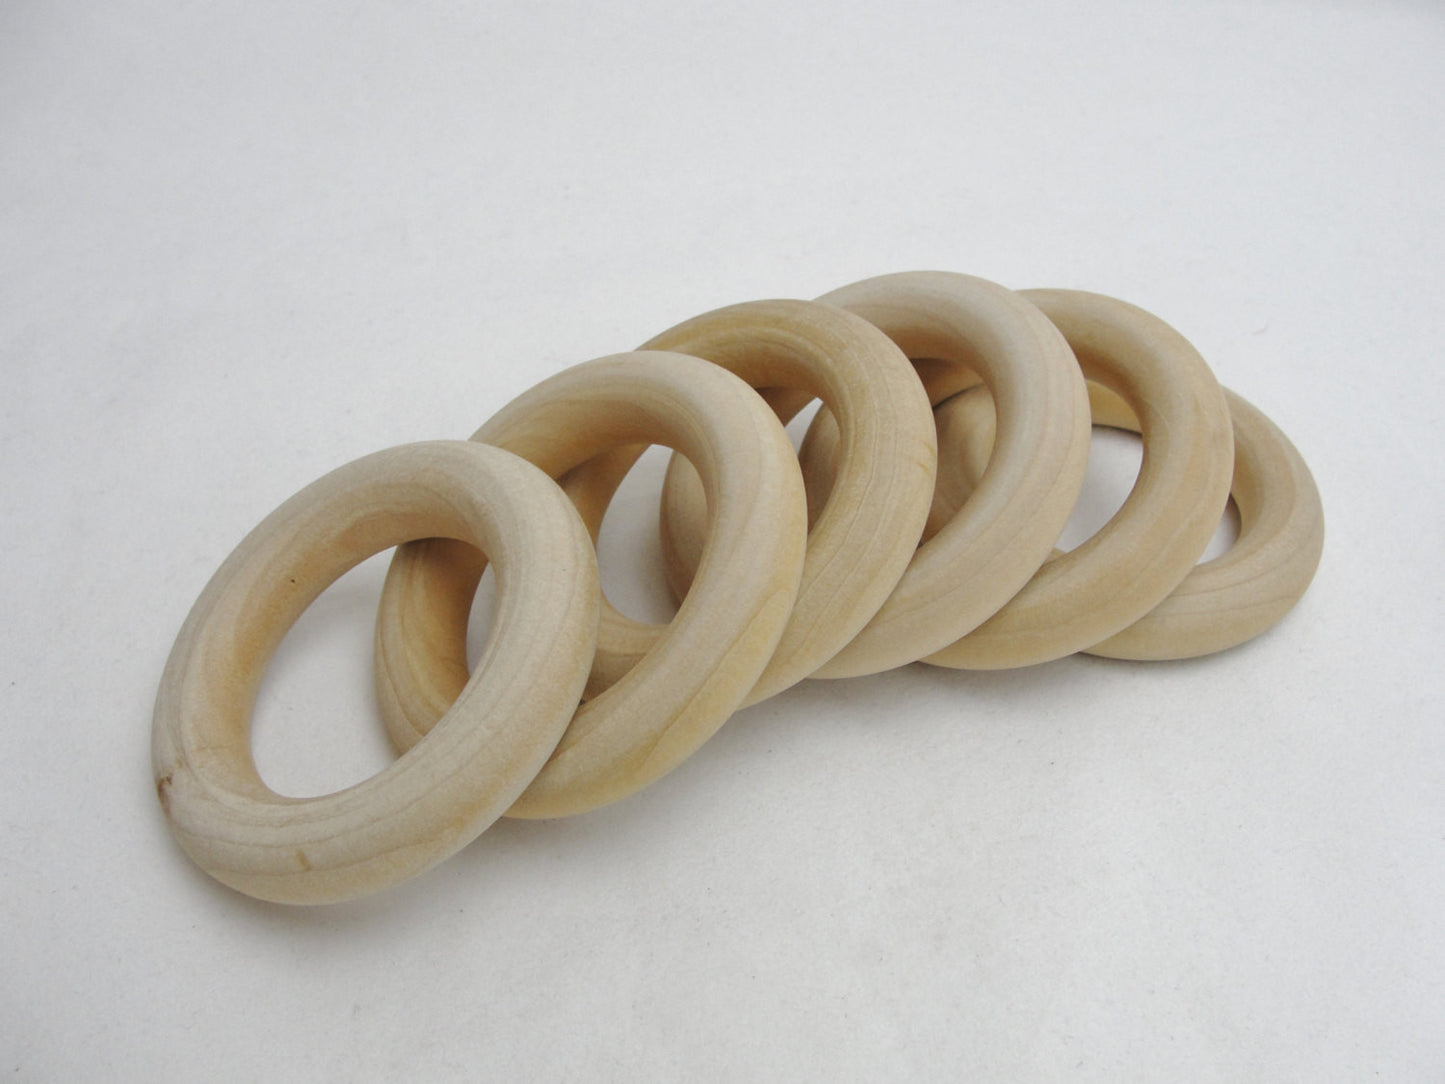 6 Wooden rings 2 1/2" with 1 1/2" inside dimension - Wood parts - Craft Supply House